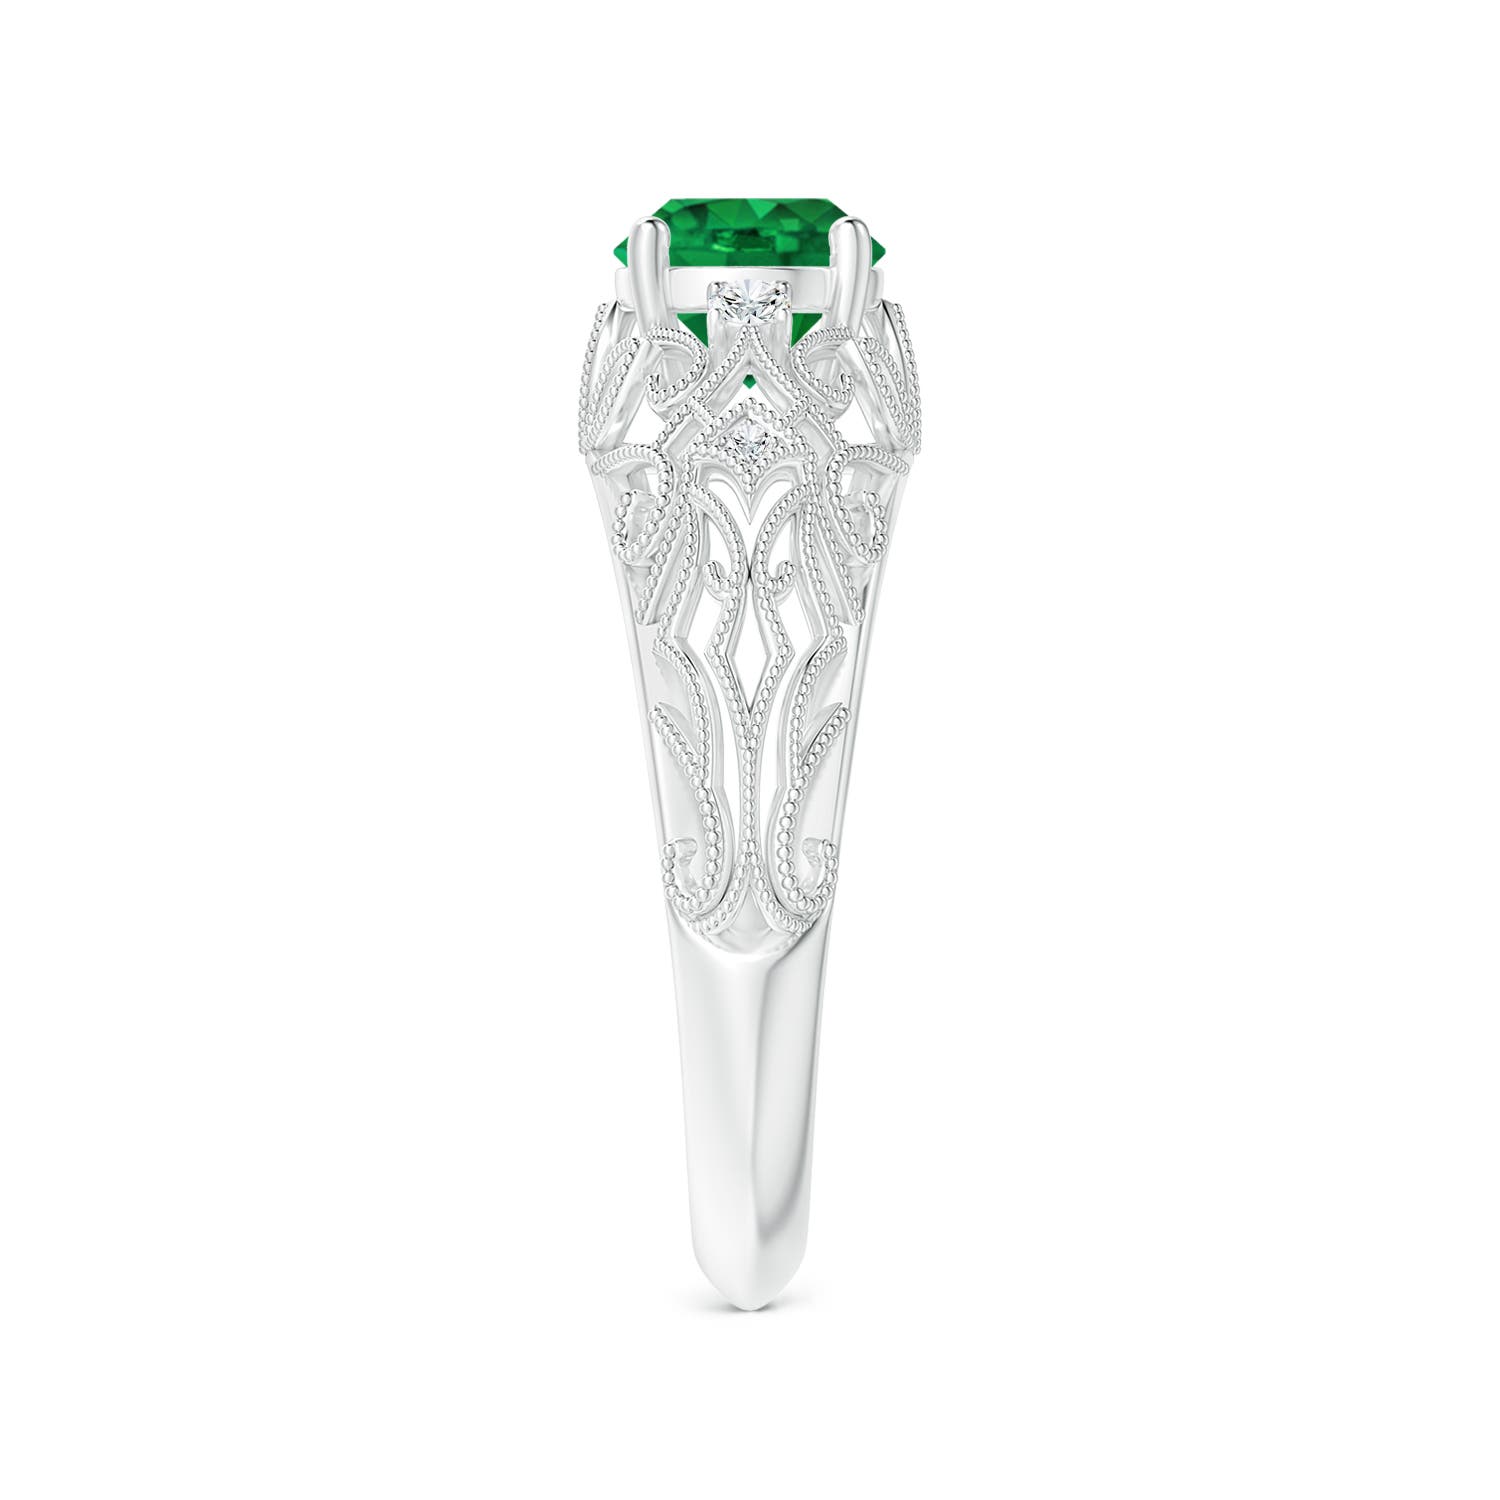 AAA - Emerald / 0.82 CT / 14 KT White Gold